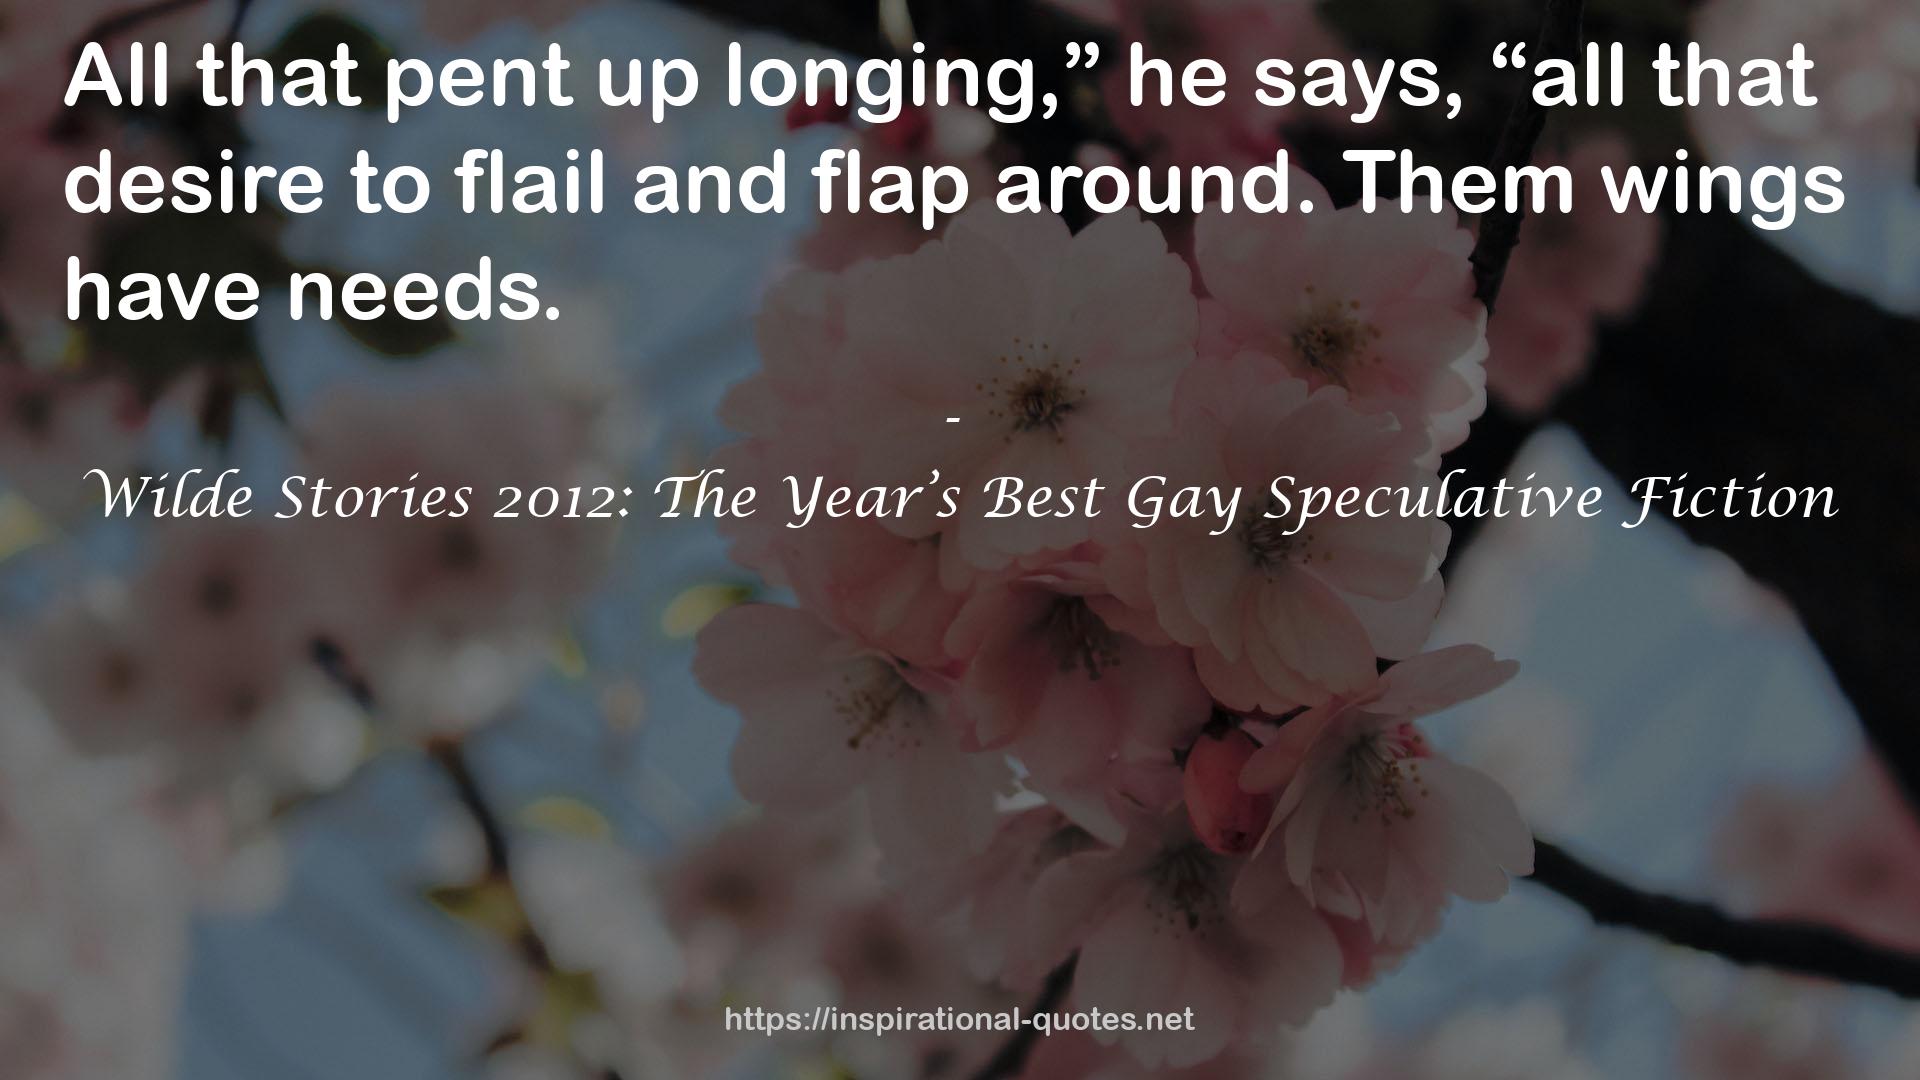 Wilde Stories 2012: The Year’s Best Gay Speculative Fiction QUOTES